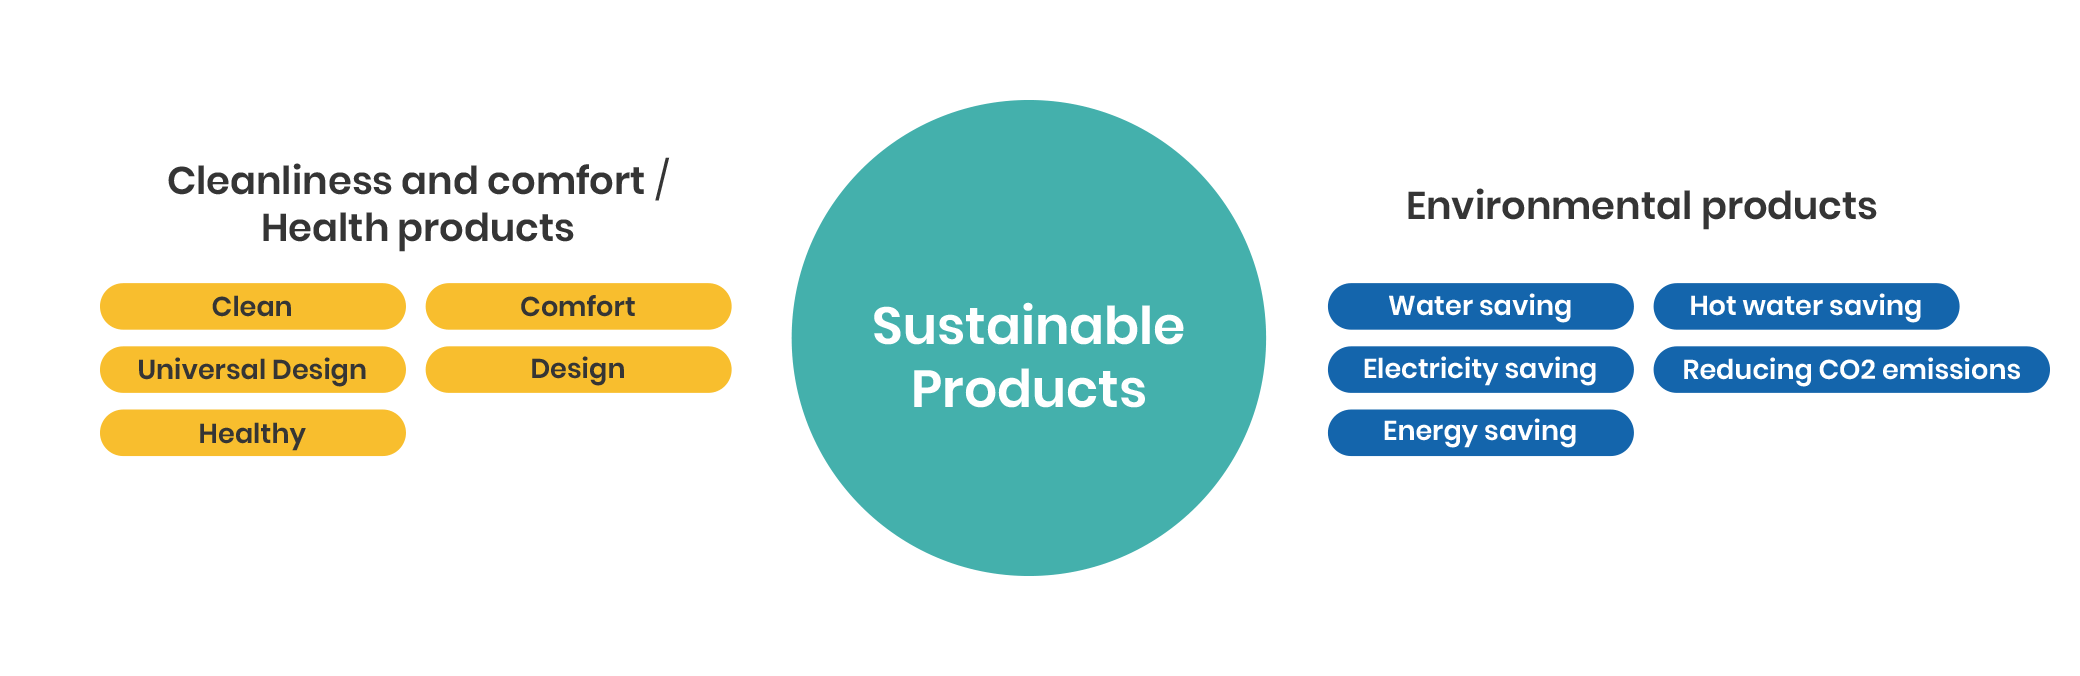 Sustainable Products. Cleanliness and comfort / Health products: Clean, Comodidad, Universal Design, Diseño, Healthy. Environmental products: Ahorro de agua, Hot water saving, Electricity saving, Reducing C02 emissions, Energy saving.